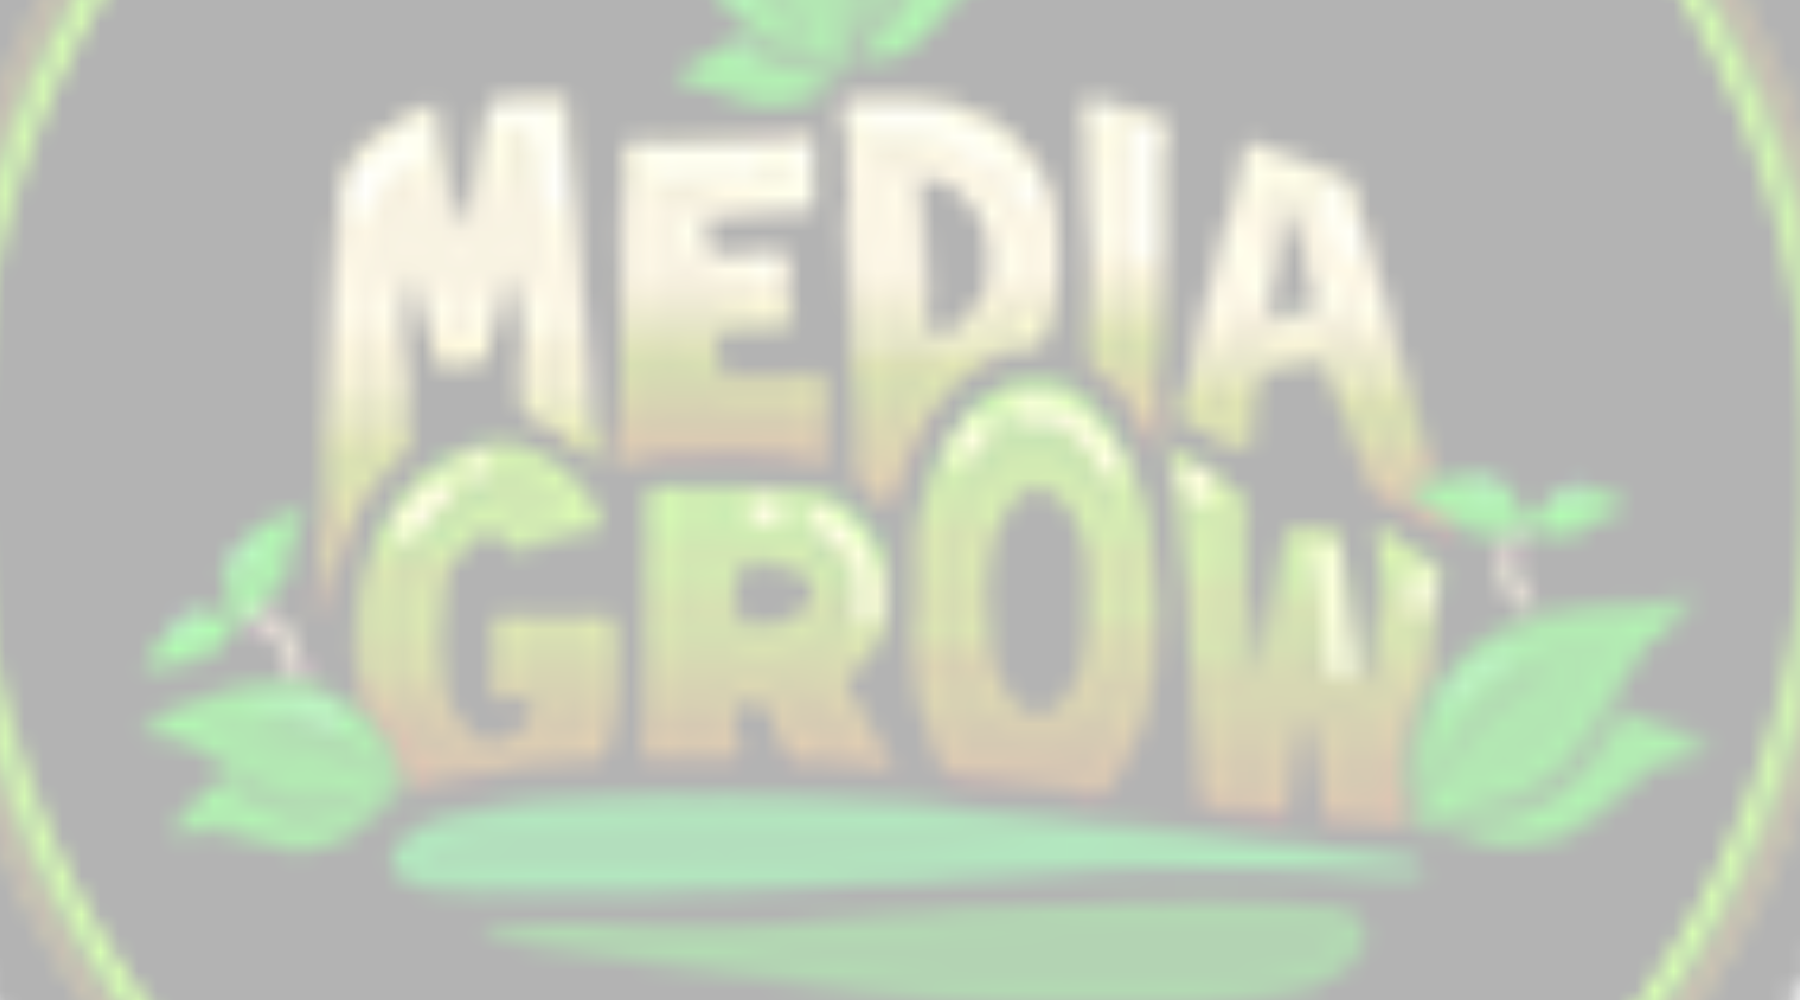 https://agroshow.info/wp-content/uploads/2021/05/Media-Grow-FONDO.png